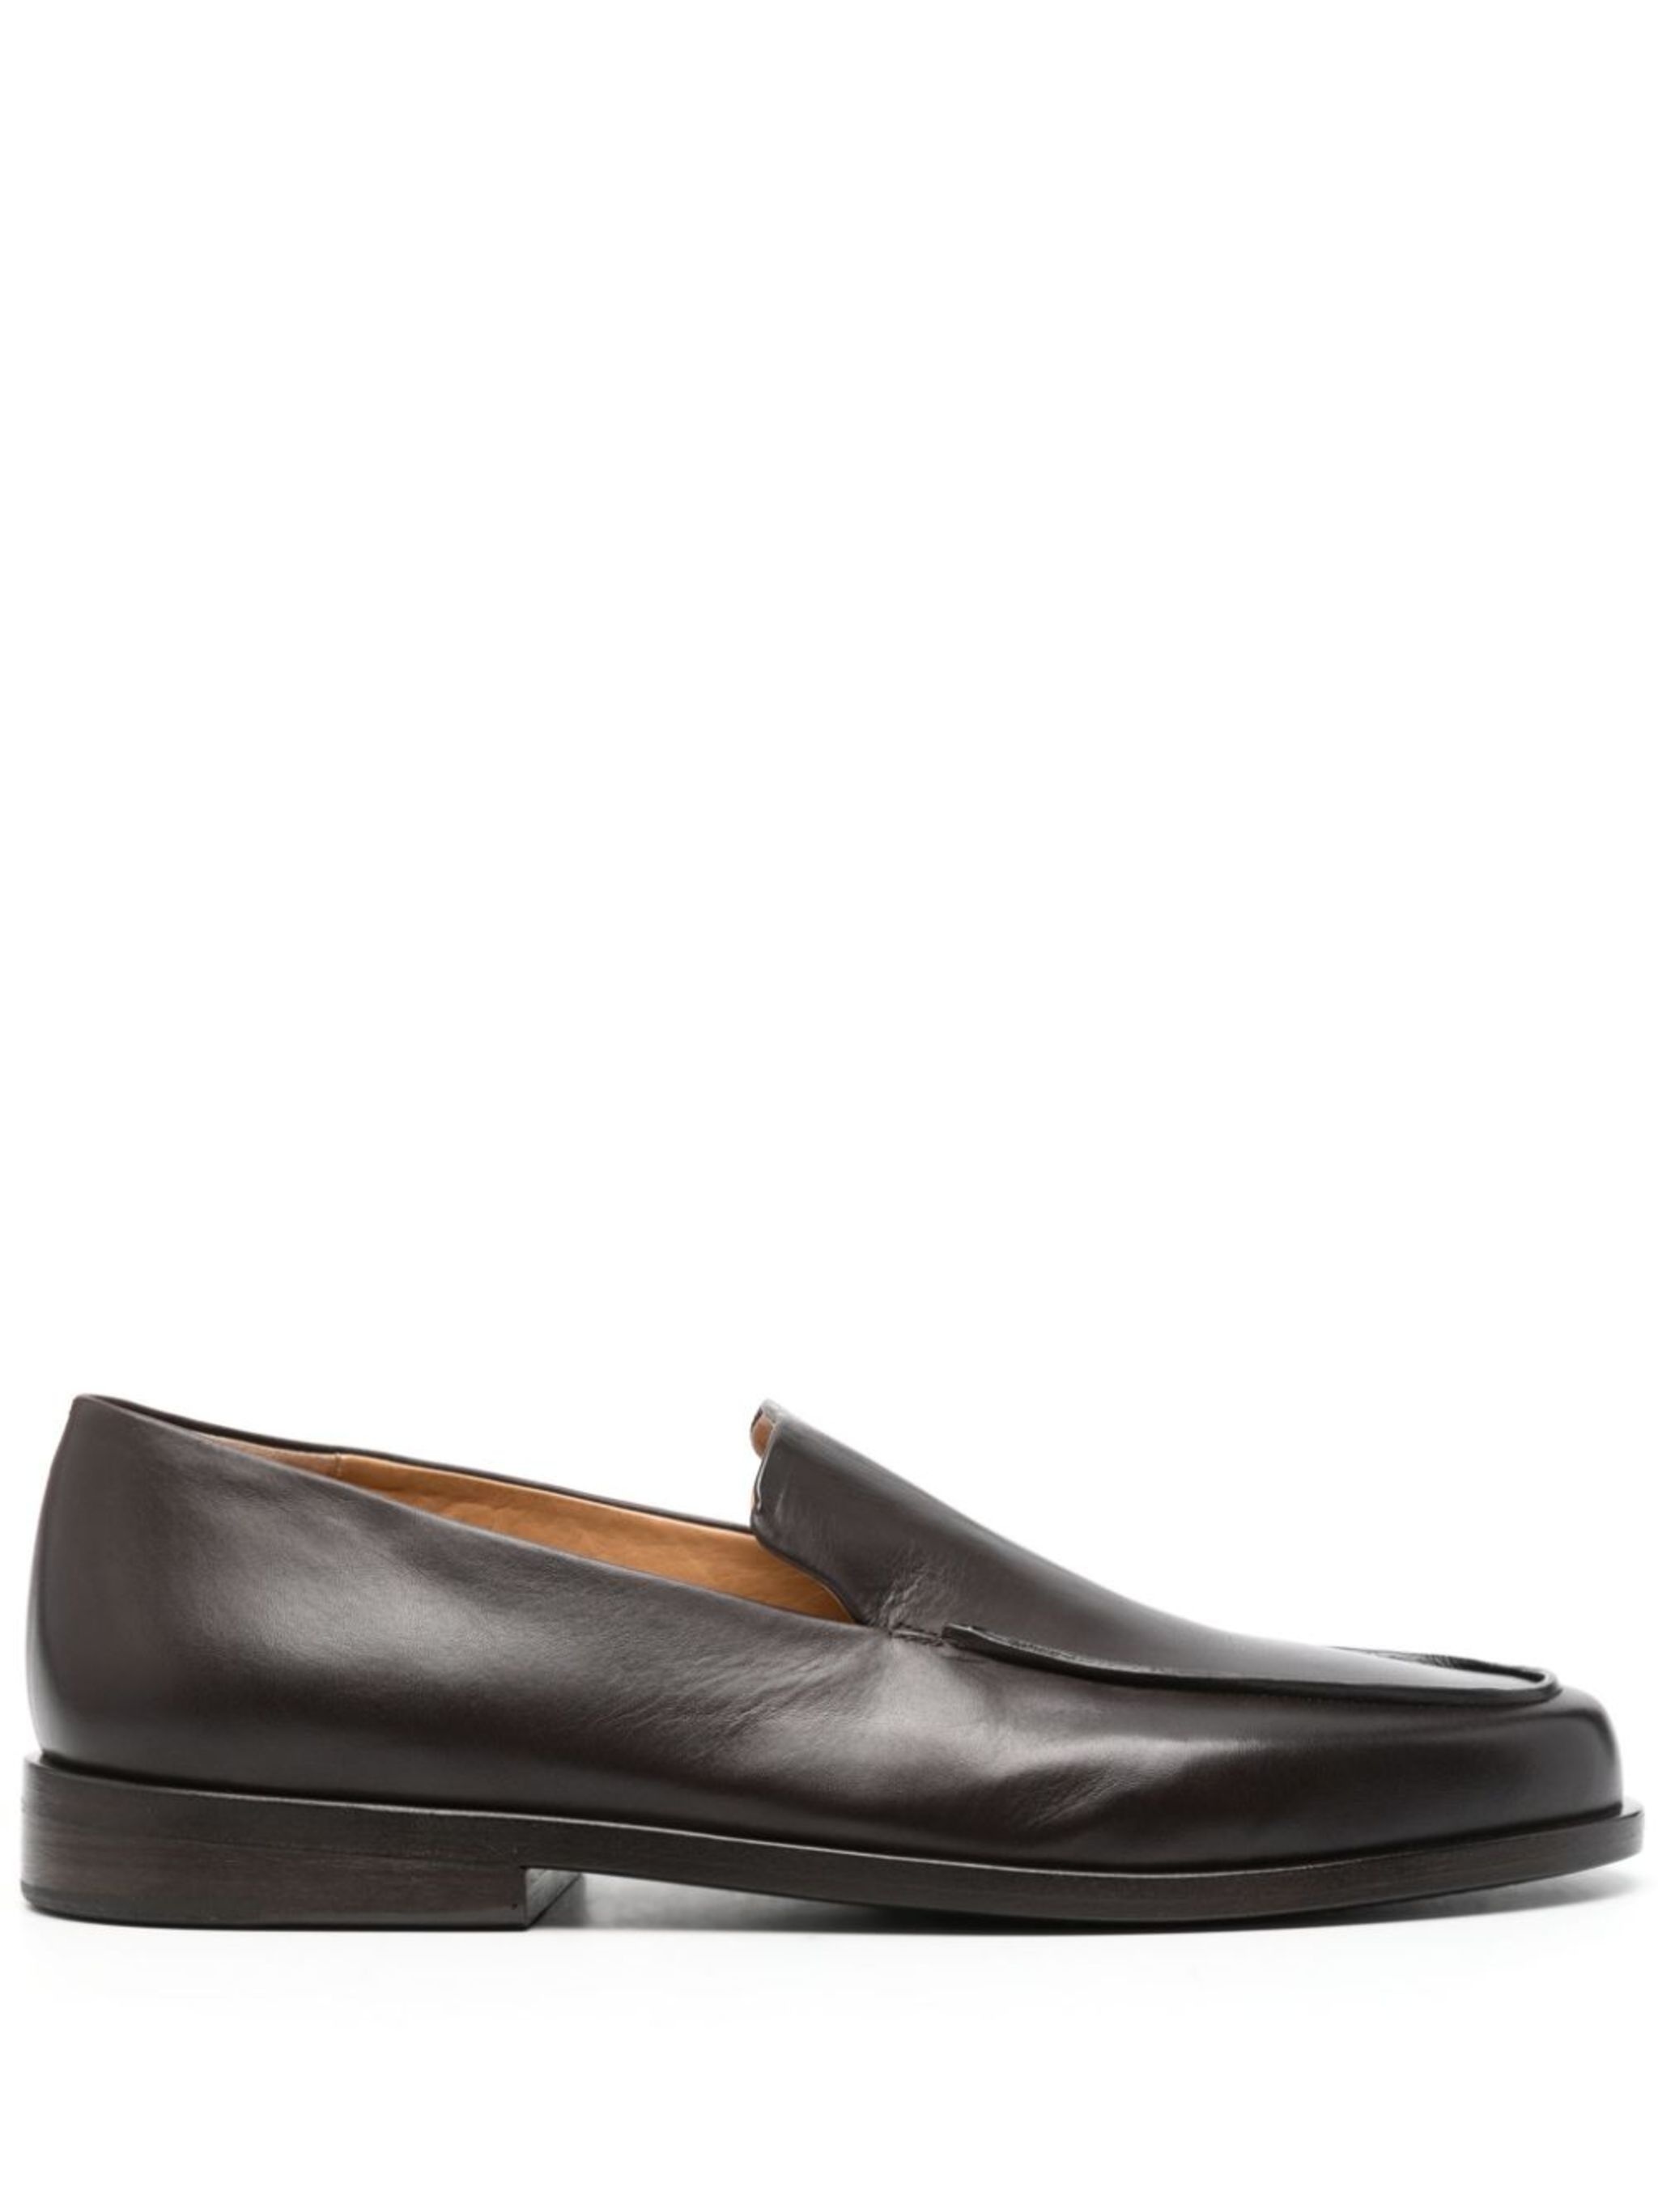 leather slip-on loafers - 1